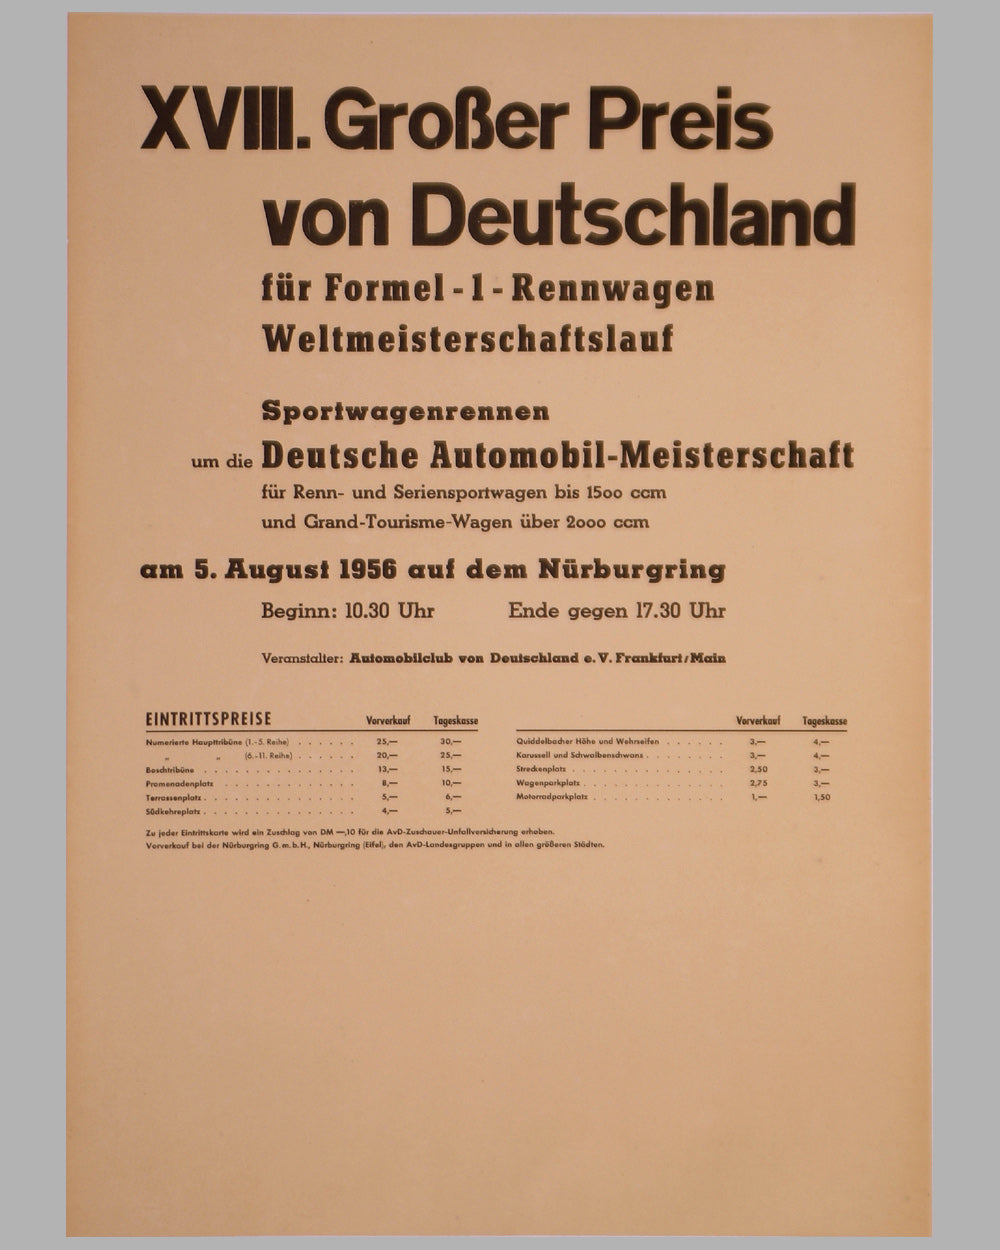 1956 Grand Prix of Germany, Nurburgring official schedule